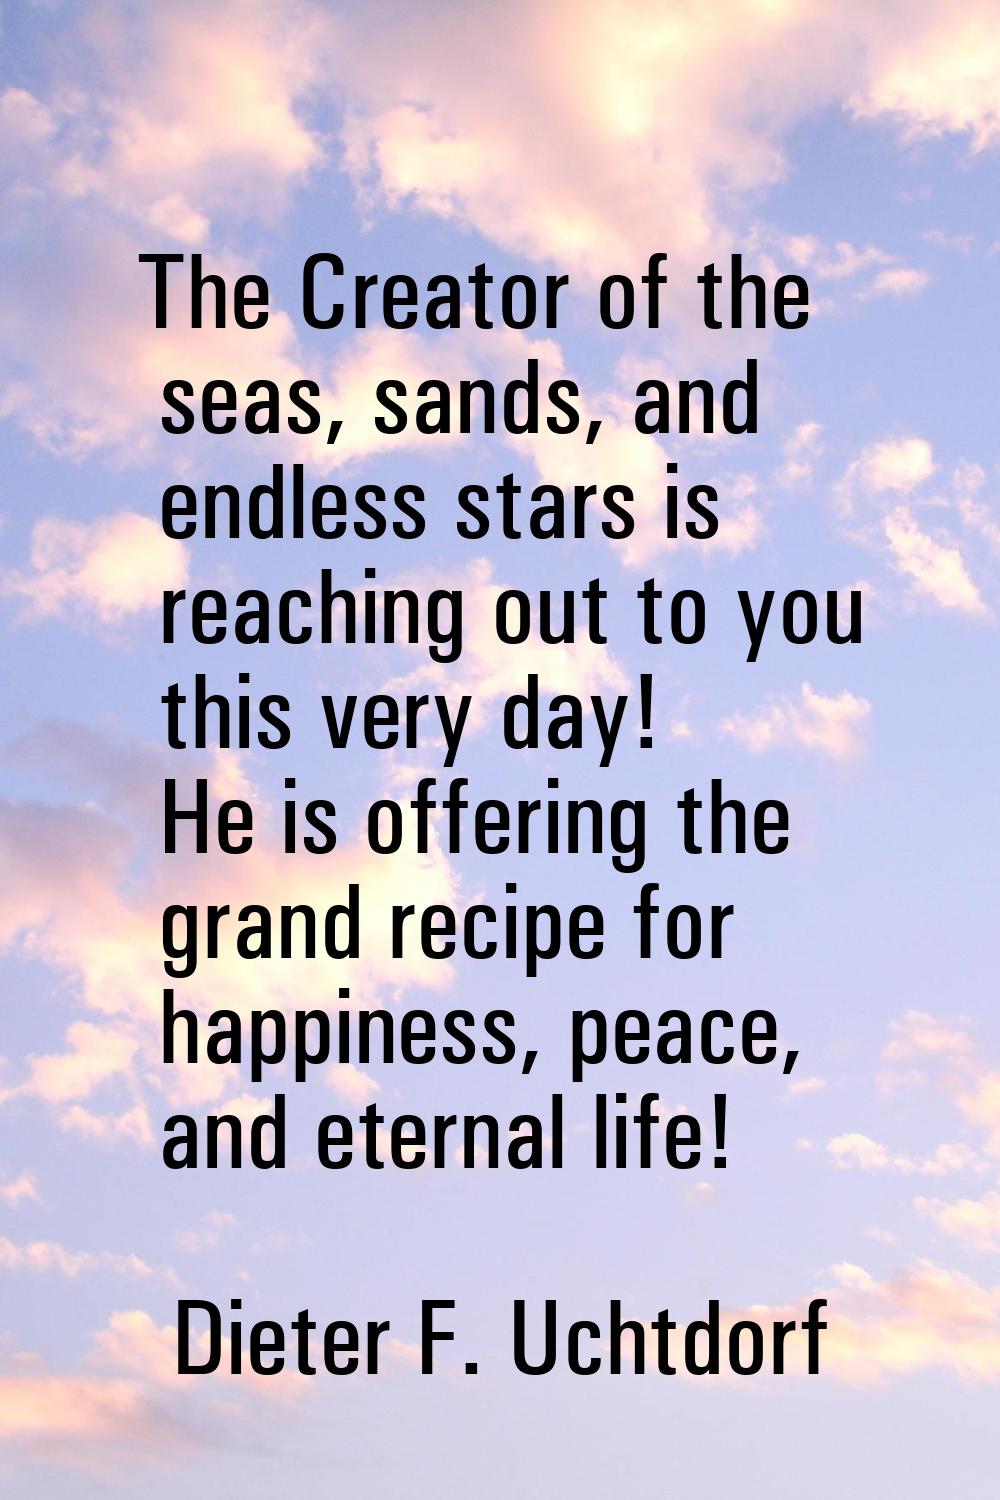 The Creator of the seas, sands, and endless stars is reaching out to you this very day! He is offer